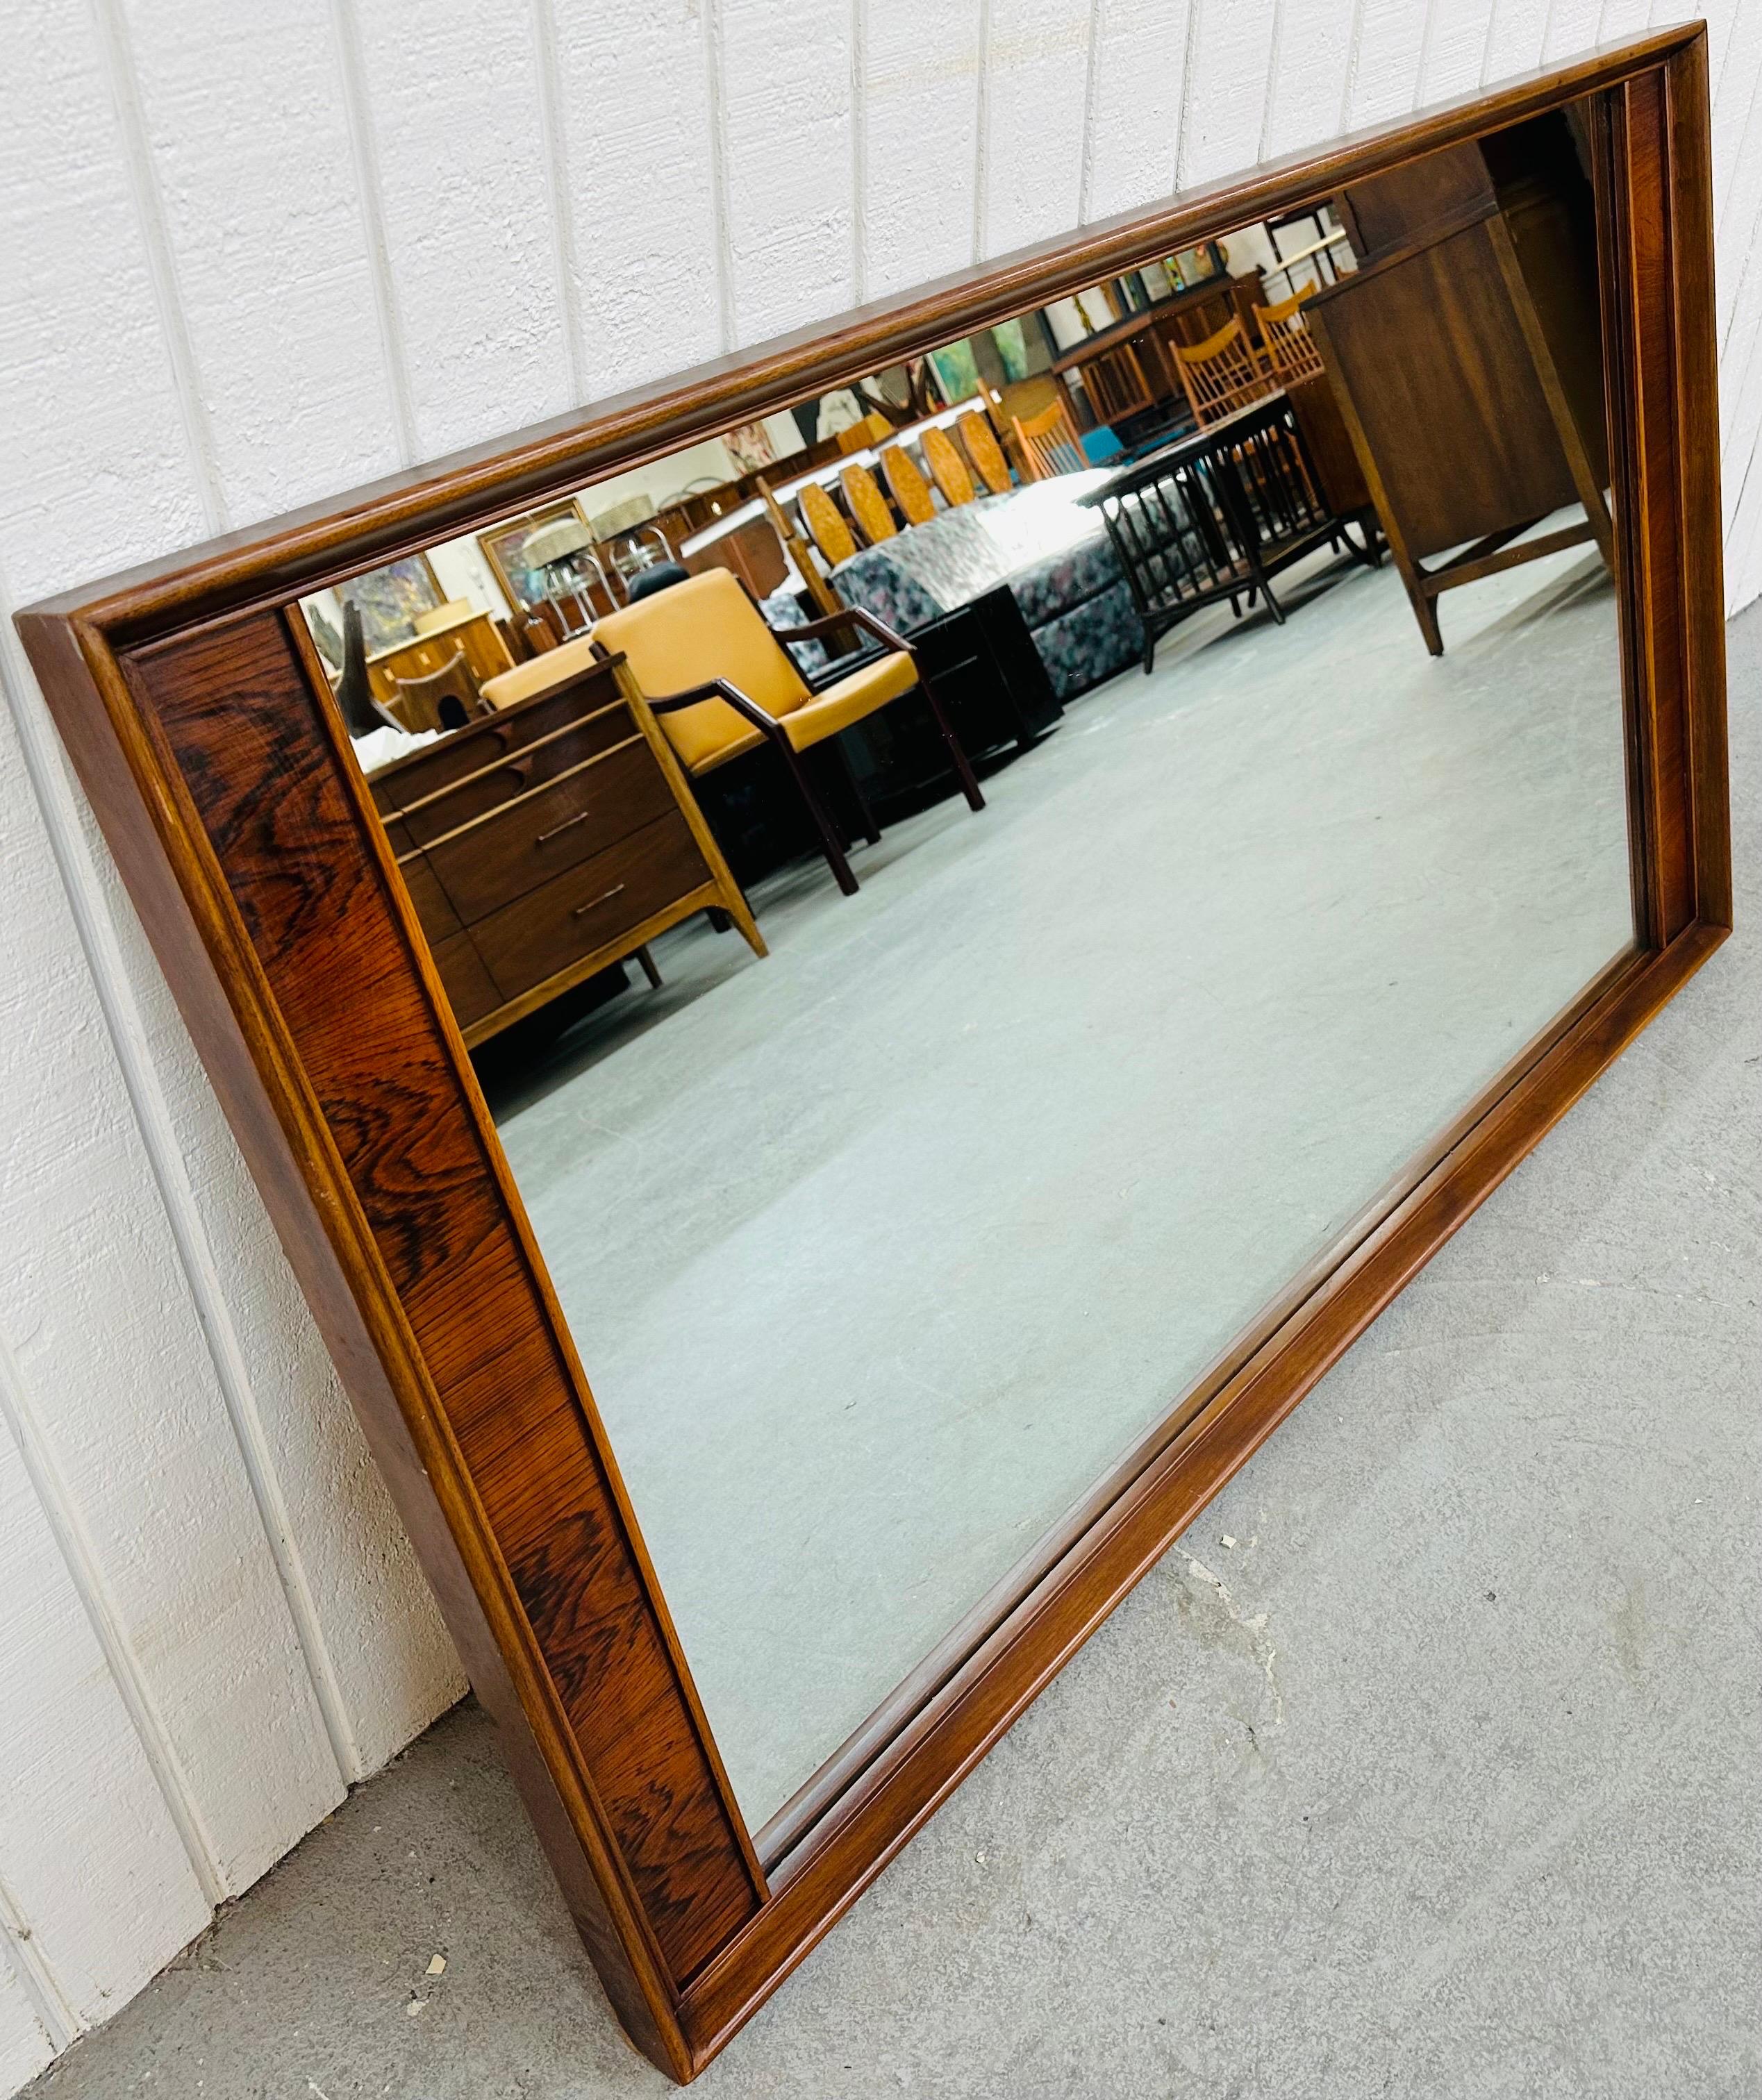 This listing is for a Mid-Century Modern Kent Coffey Perspecta Large Wall Mirror. Featuring a straight line rectangular design, solid wood frame, rosewood accent on each side, and a beautiful walnut finish. This is an exceptional combination of